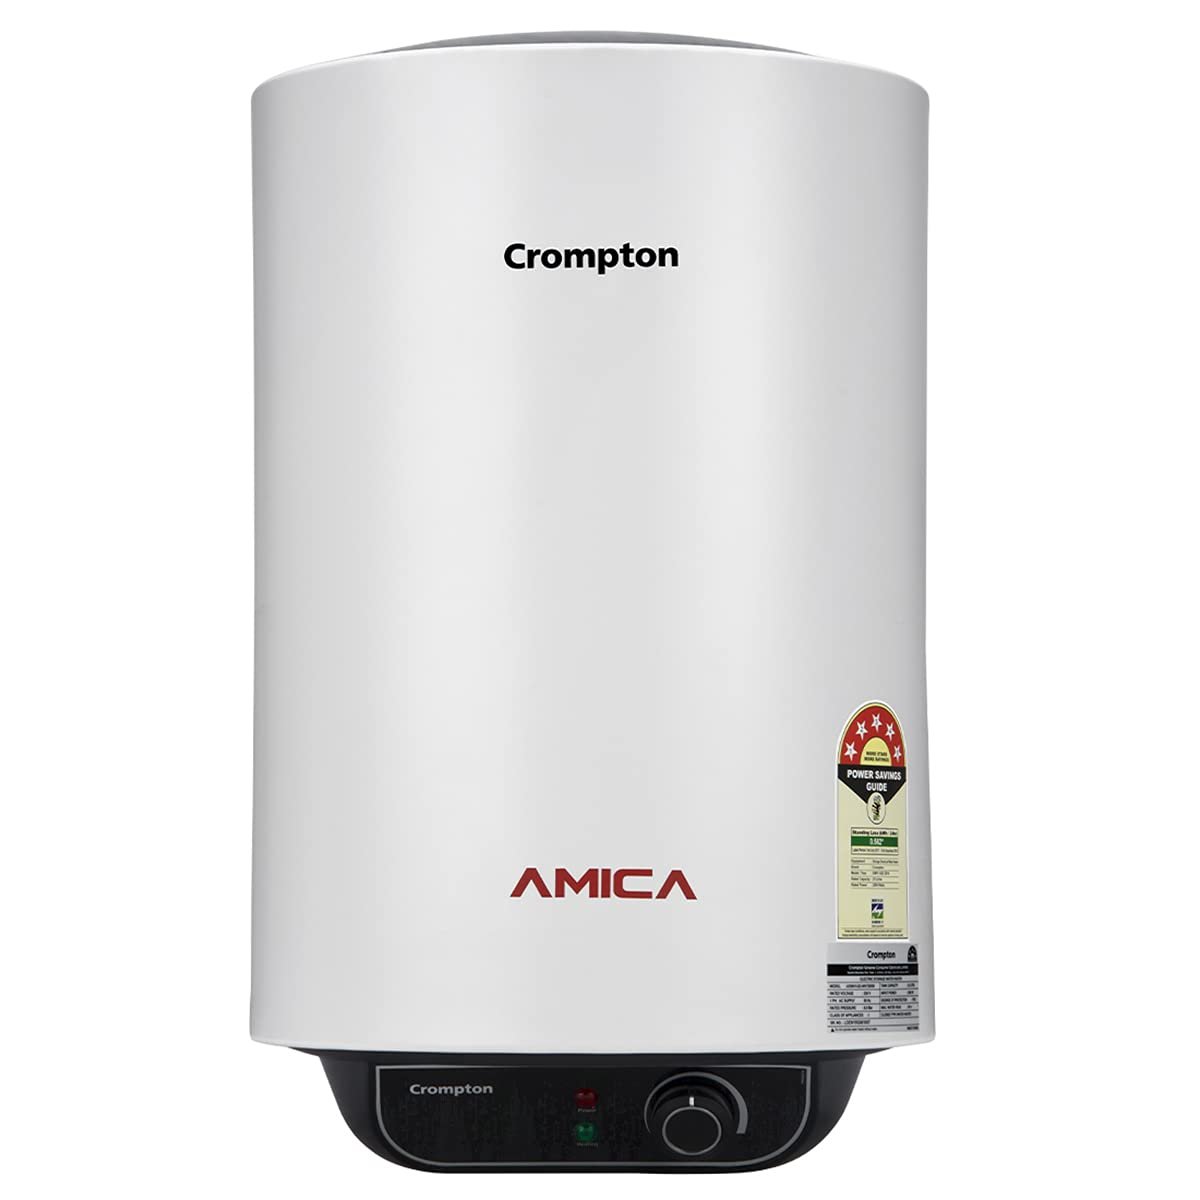 Crompton Amica 15-L 5 Star Rated Storage Water Heater (Geyser) with Free Installation